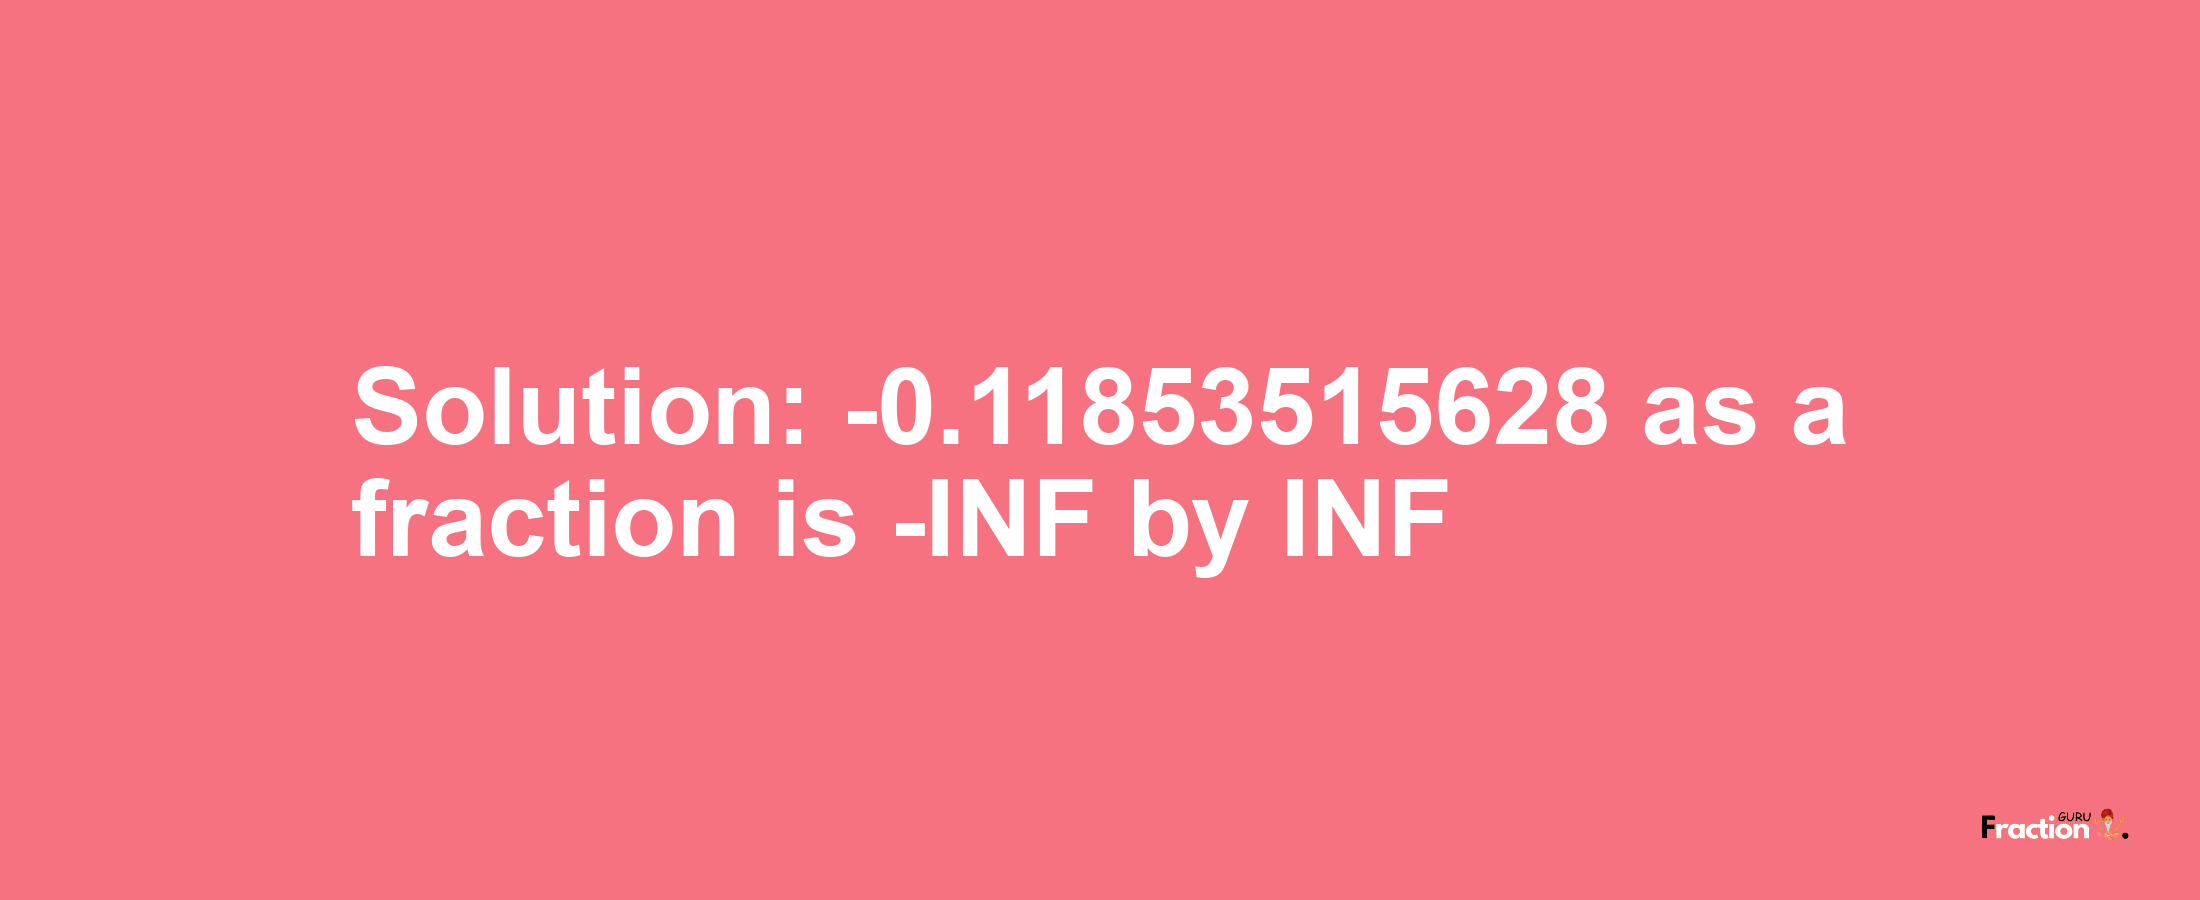 Solution:-0.11853515628 as a fraction is -INF/INF